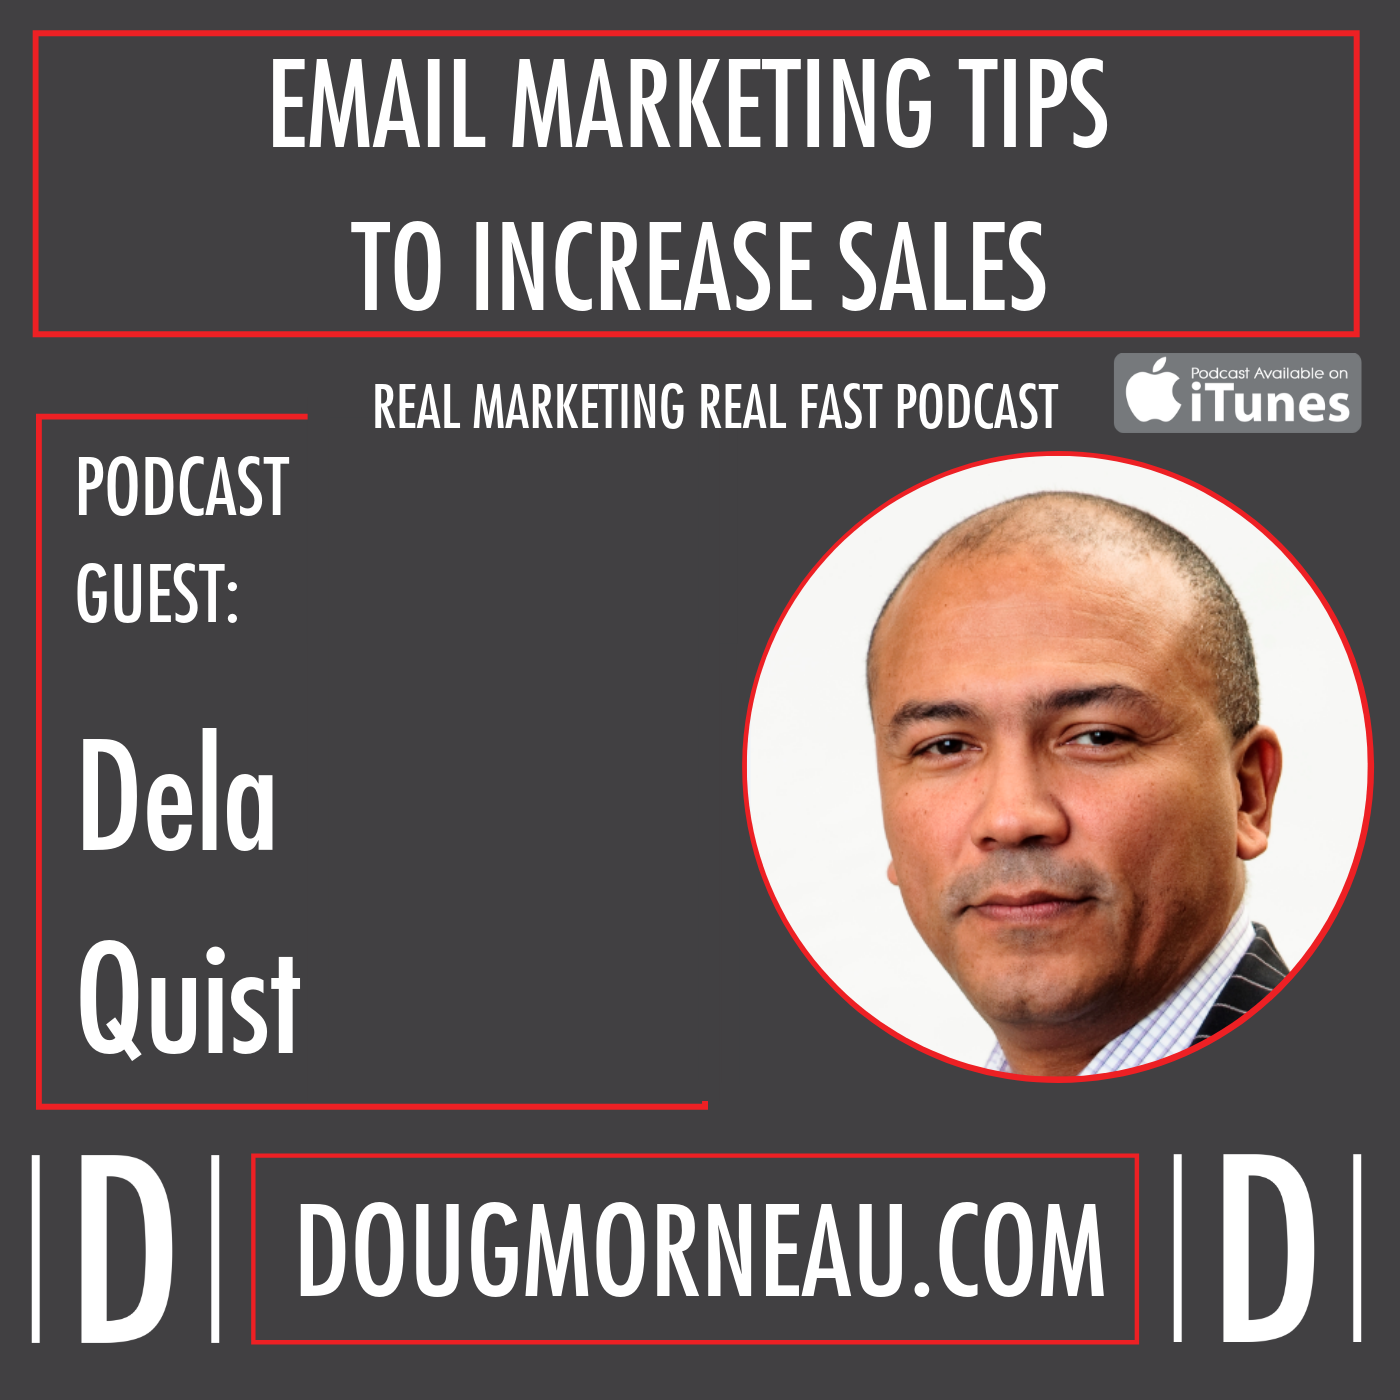 EMAIL MARKETING TIPS TO INCREASE SALES - DELA QUIST - DOUG MORNEAU - REAL MARKETING REAL FAST PODCAST